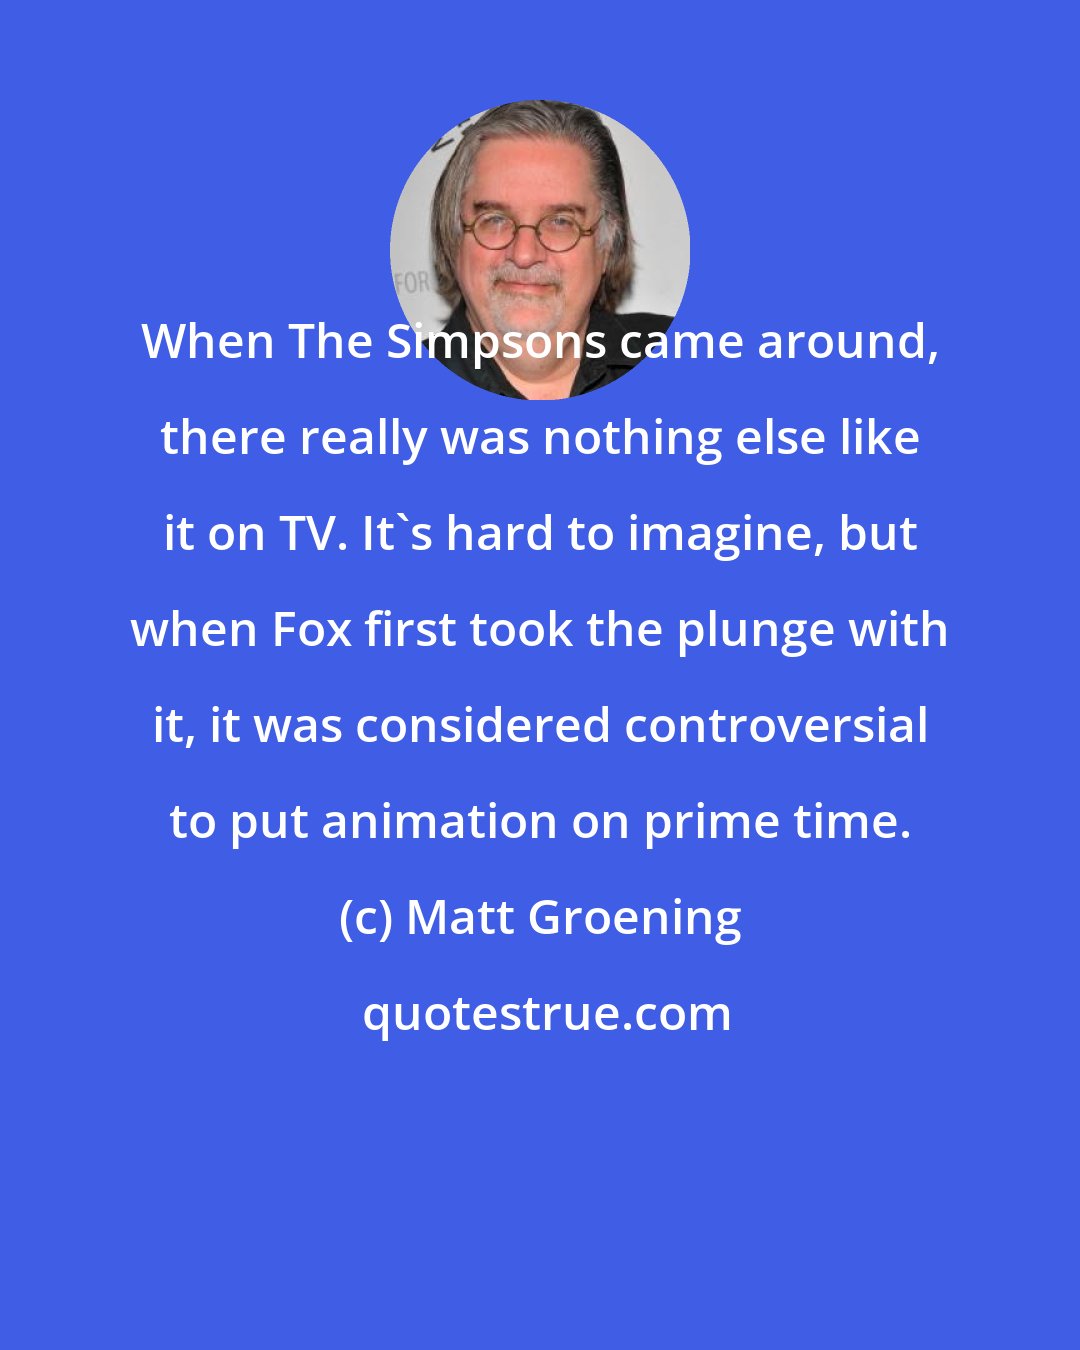 Matt Groening: When The Simpsons came around, there really was nothing else like it on TV. It's hard to imagine, but when Fox first took the plunge with it, it was considered controversial to put animation on prime time.